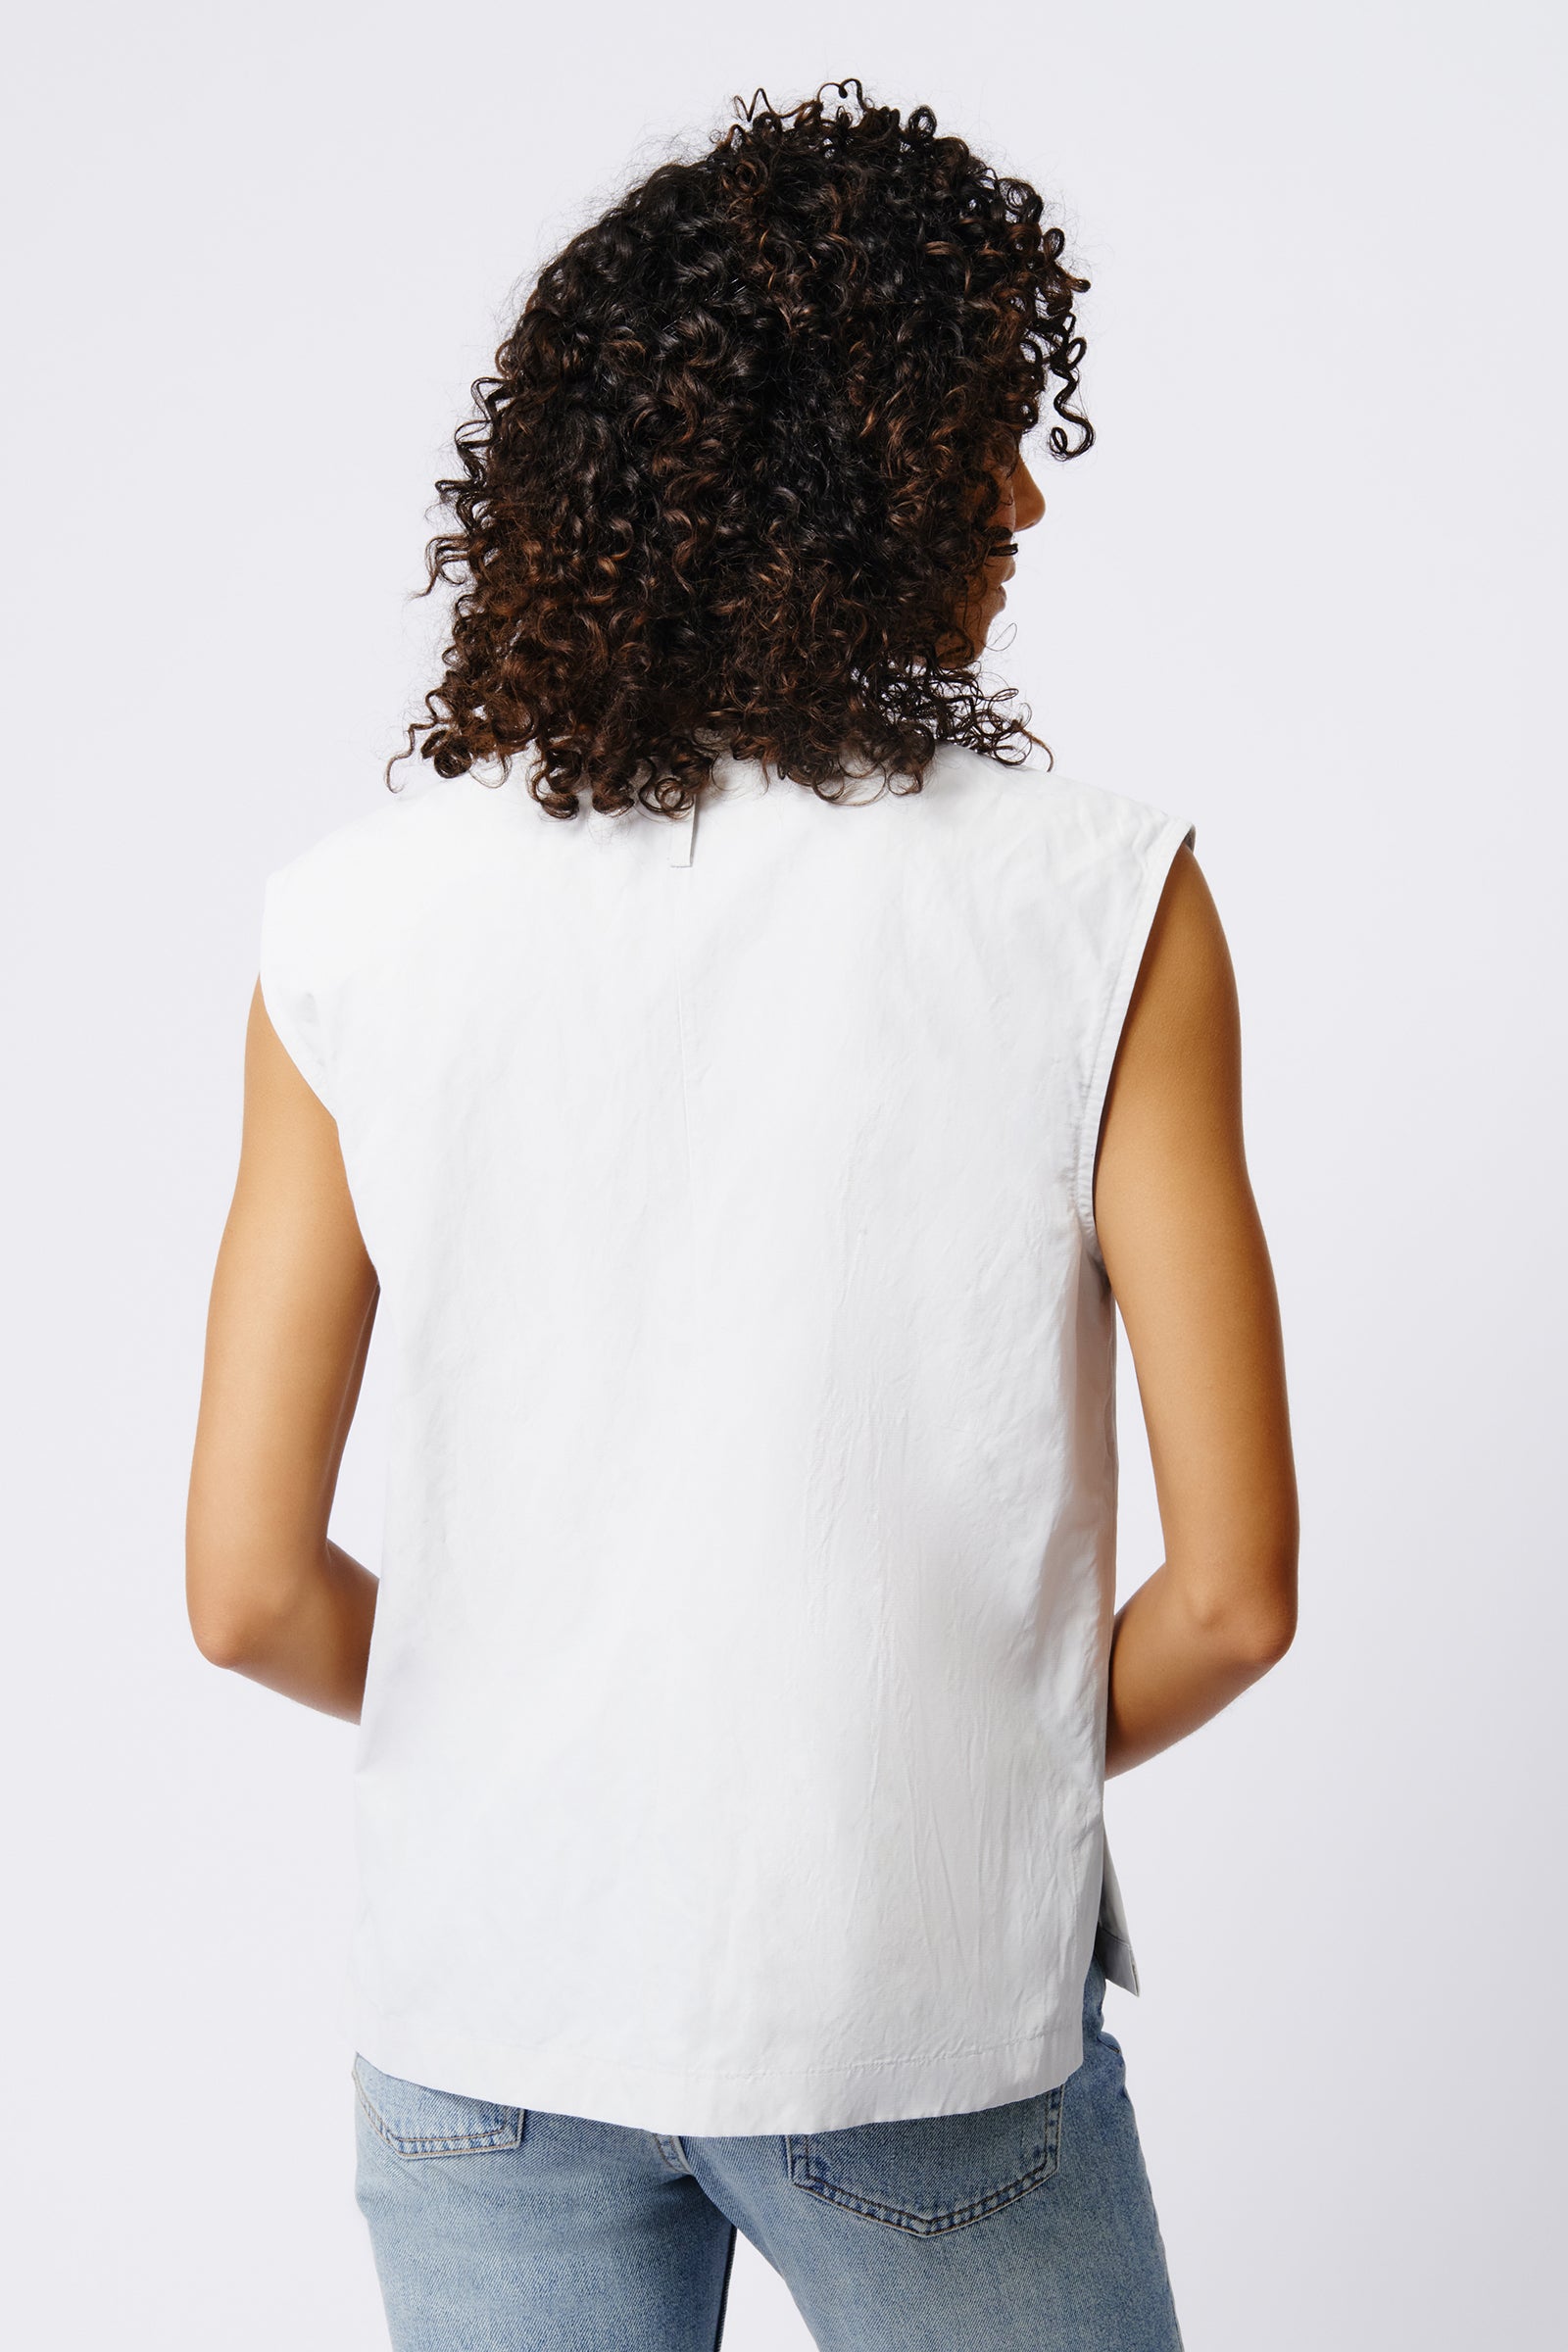 Kal Rieman Ava V Neck Shell in Stone on Model Back View Crop